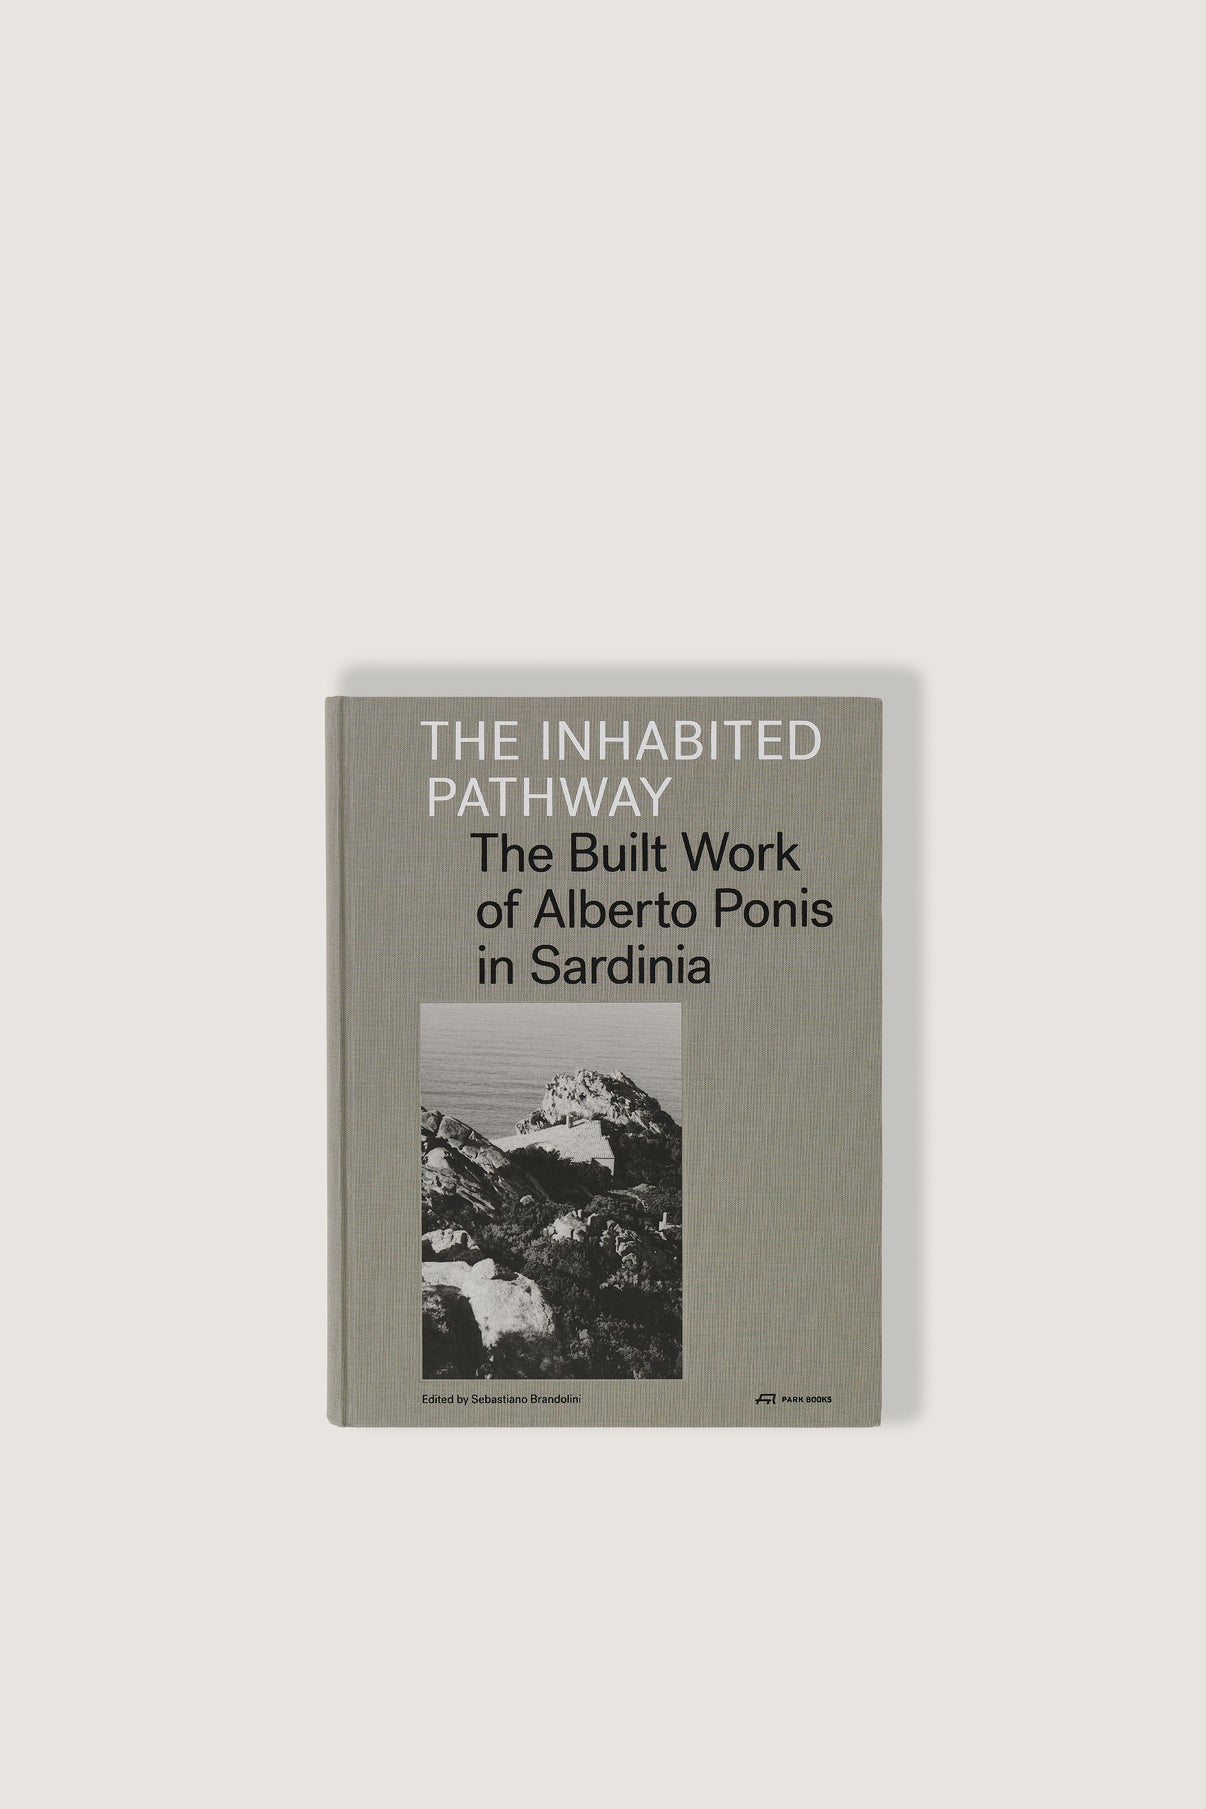 BOOK "THE INHABITED PATHWAY : THE BUILT WORK OF ALBERTO PONIS IN SARDINIA" vue 1